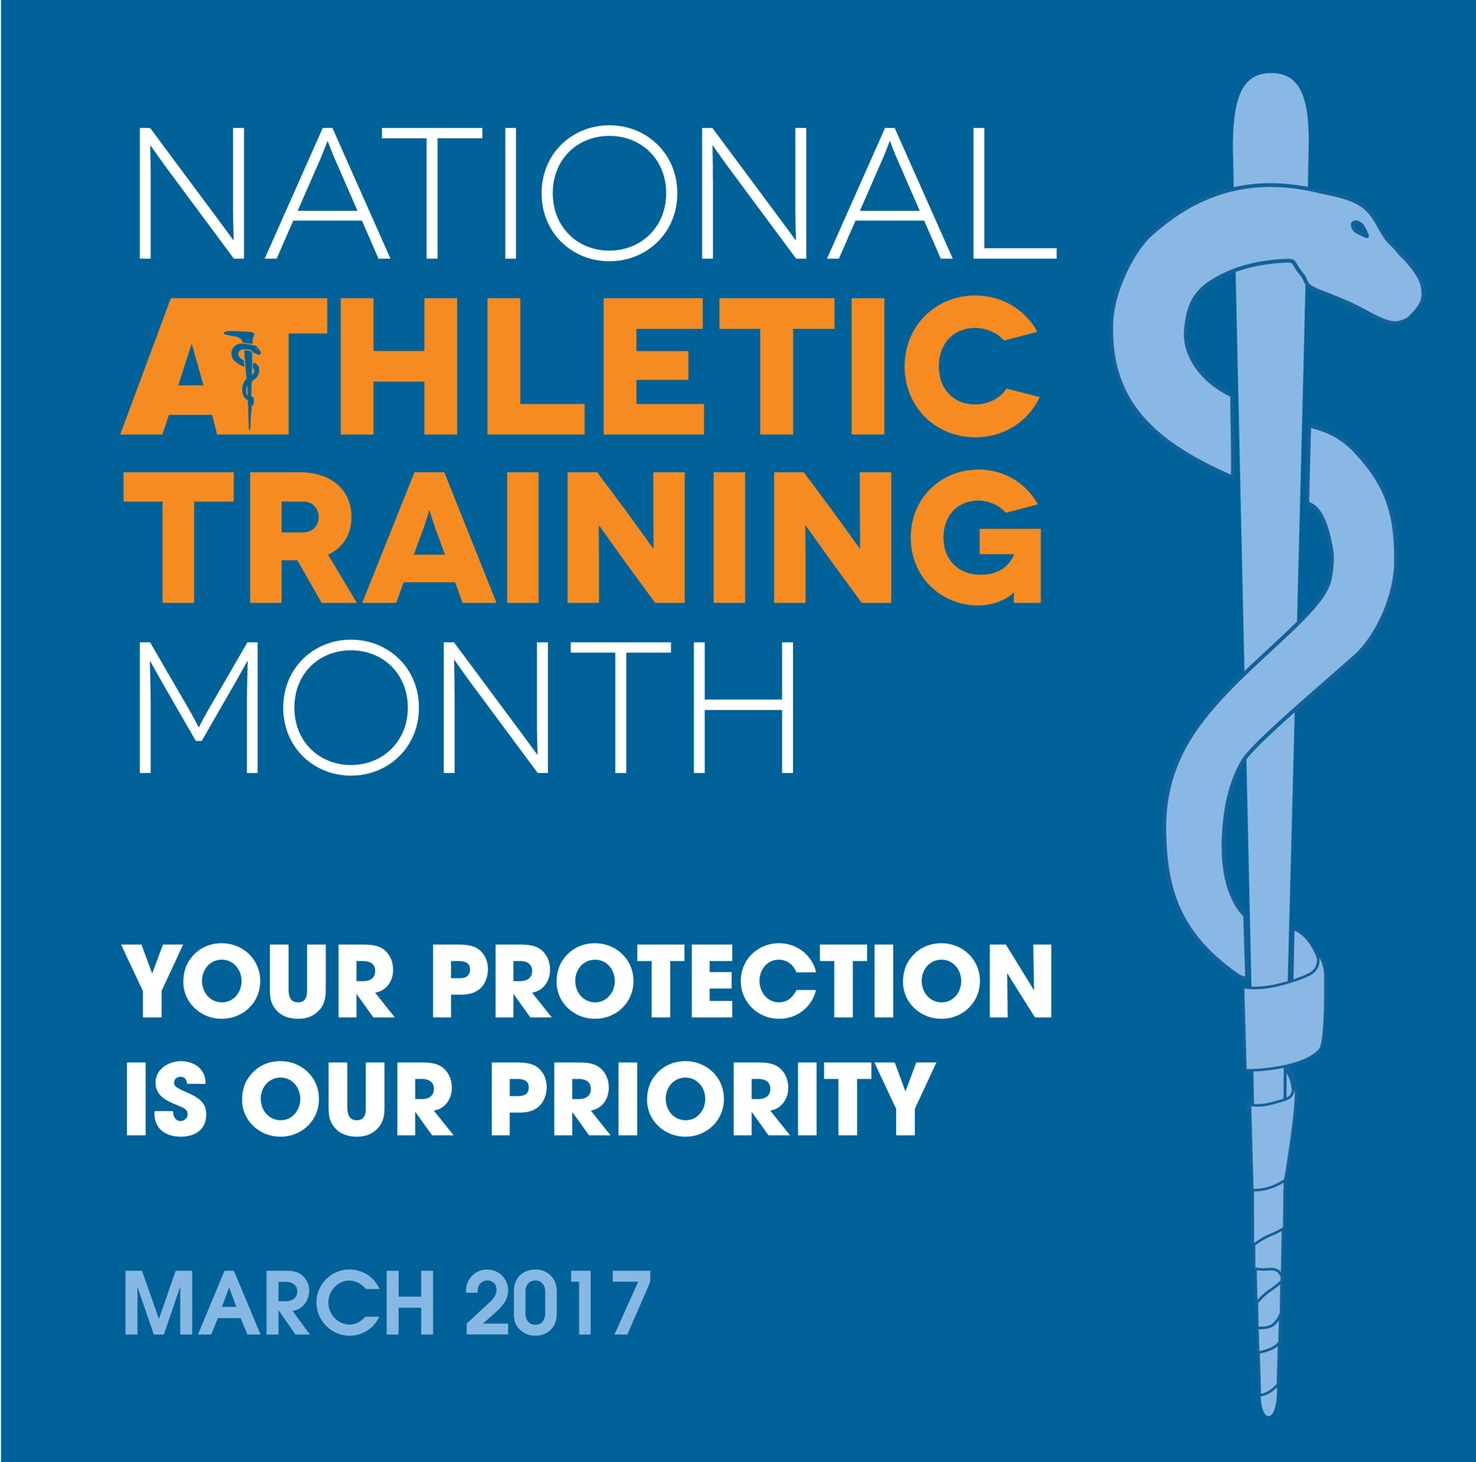 Pirates trio honored during National Athletic Training Month